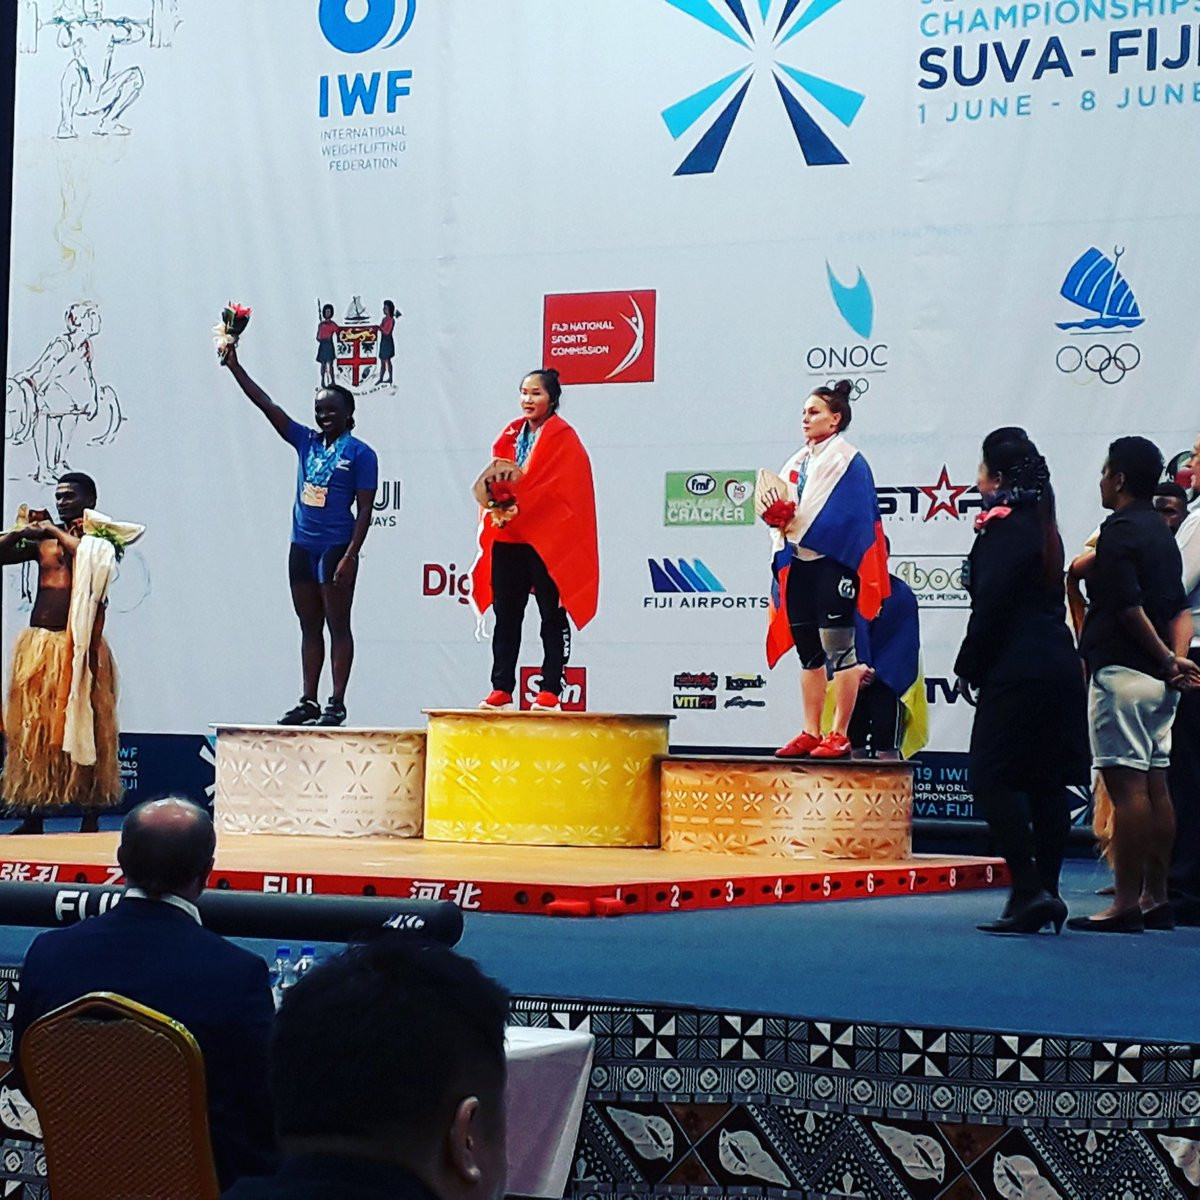 China's Gan Hongyan celebrates her victory in the 55kg category as its women's team maintained its 100 per cent success record at the IWF Junior World Championships in Suva ©Twitter